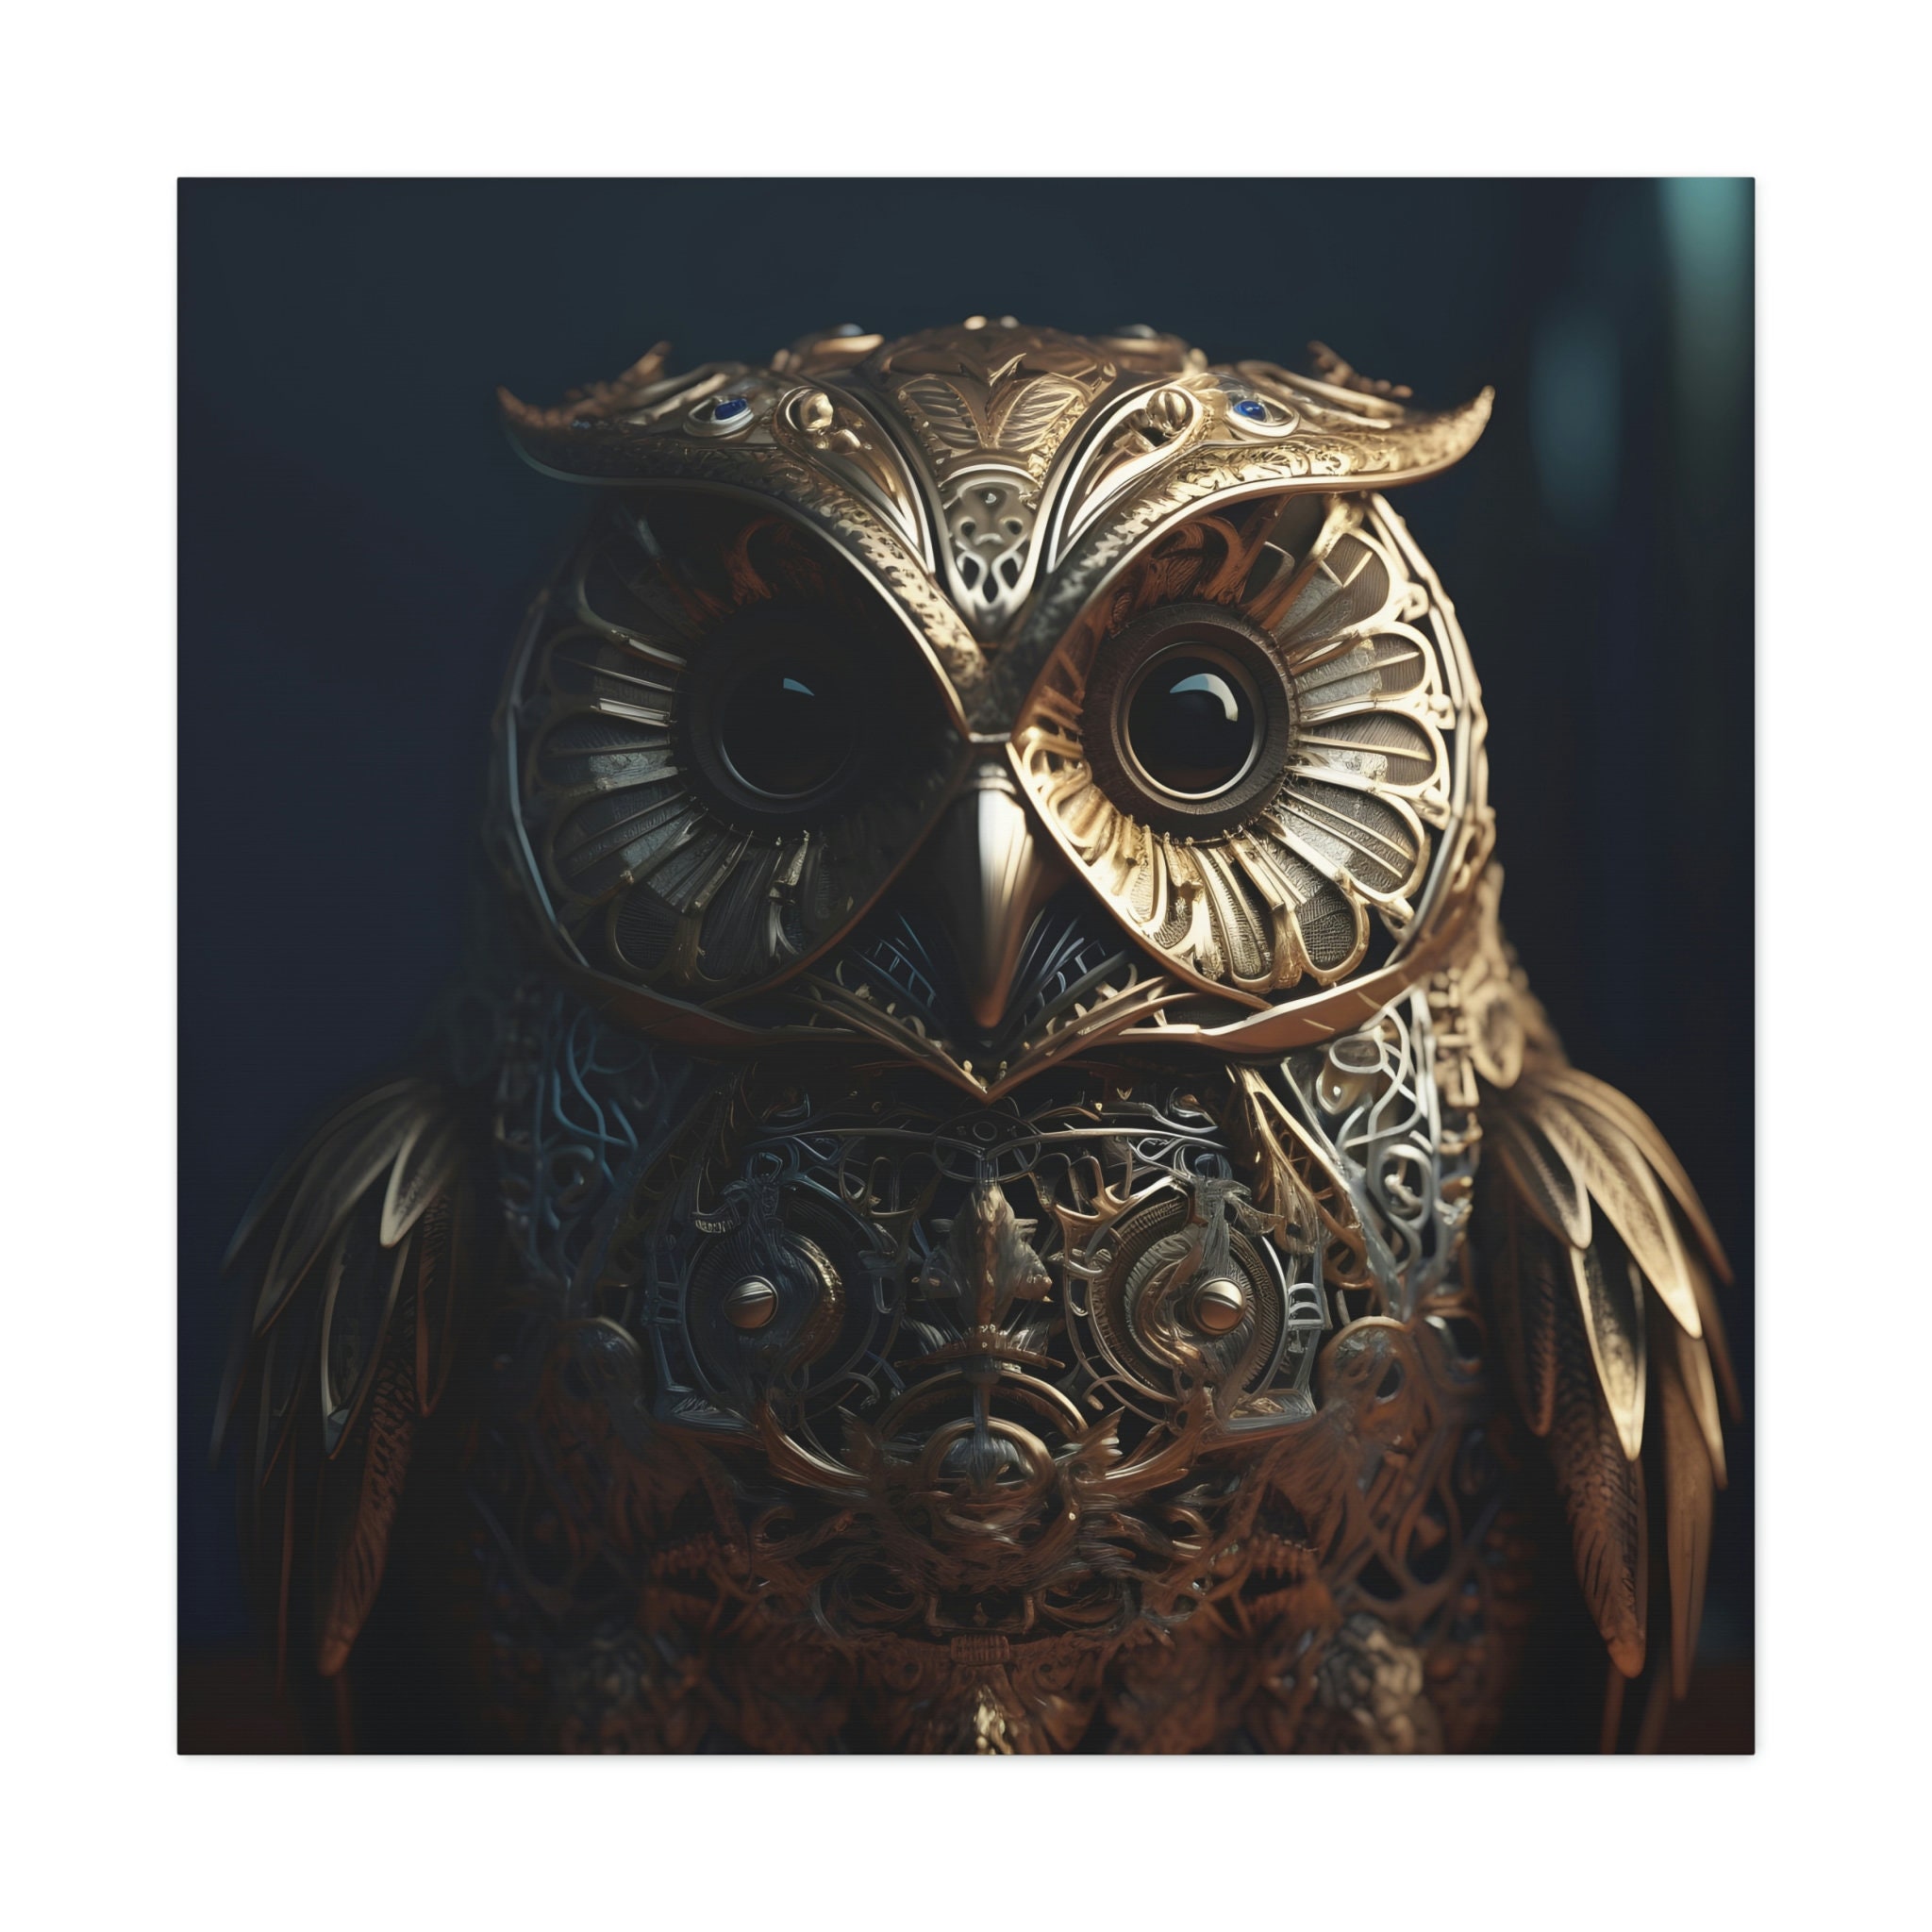 Clash of the Titans: Bubo by MonsterIsland1969 on DeviantArt